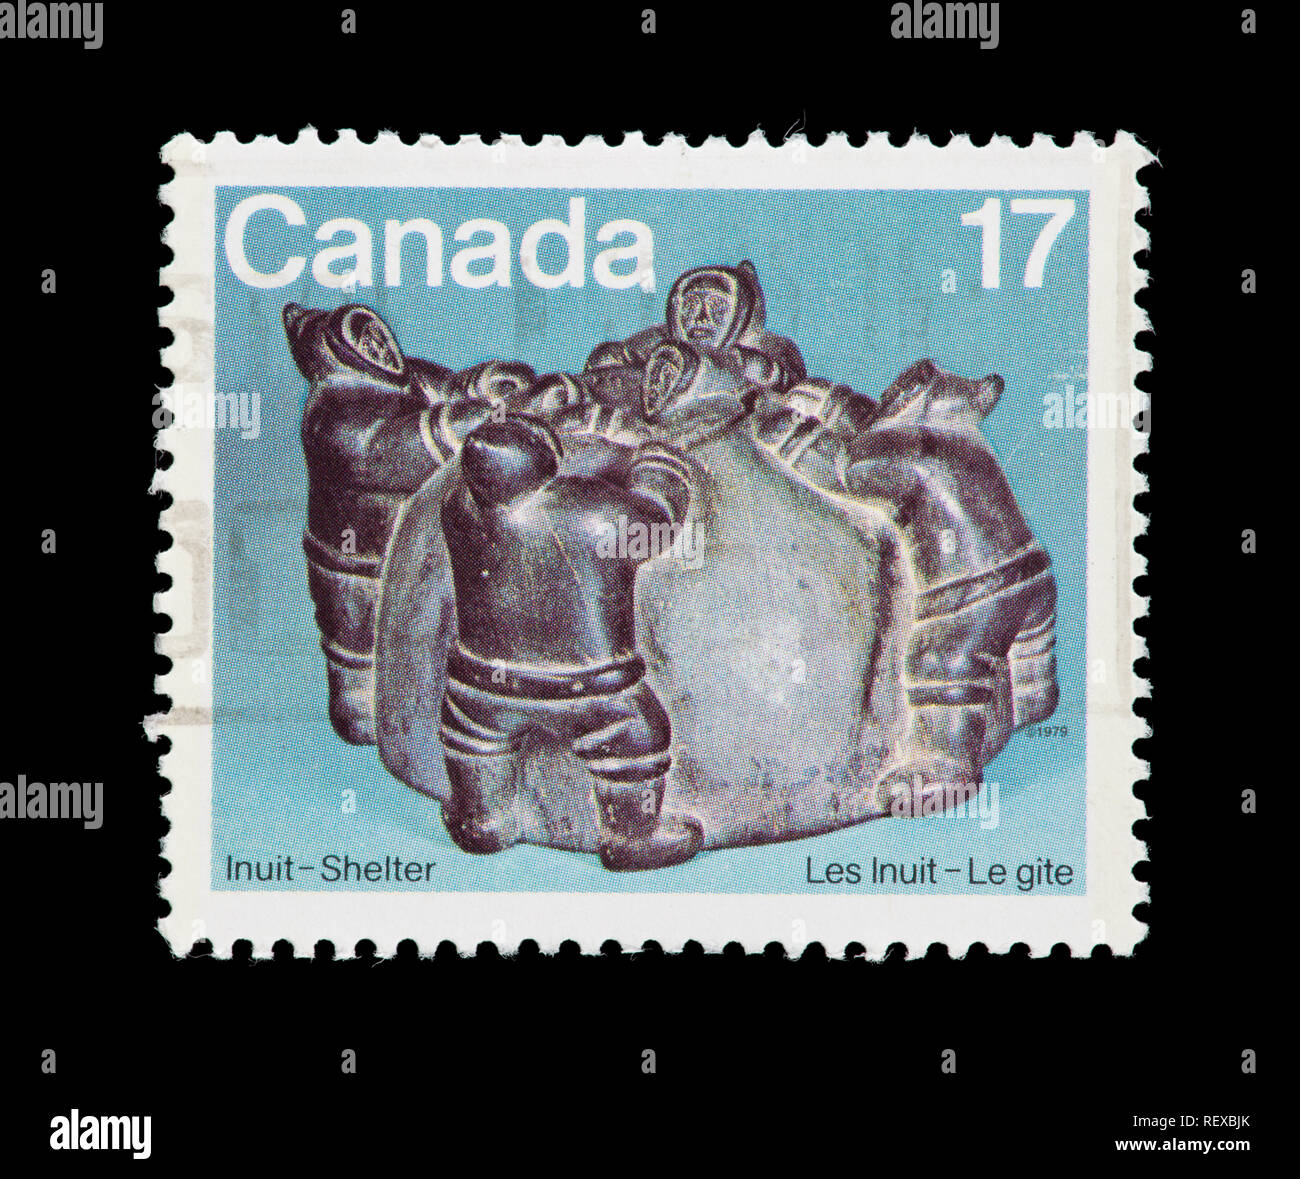 Postage stamp from Canada depicting the Abraham of Povungituk sculpture Eskimos building Igloo. Stock Photo